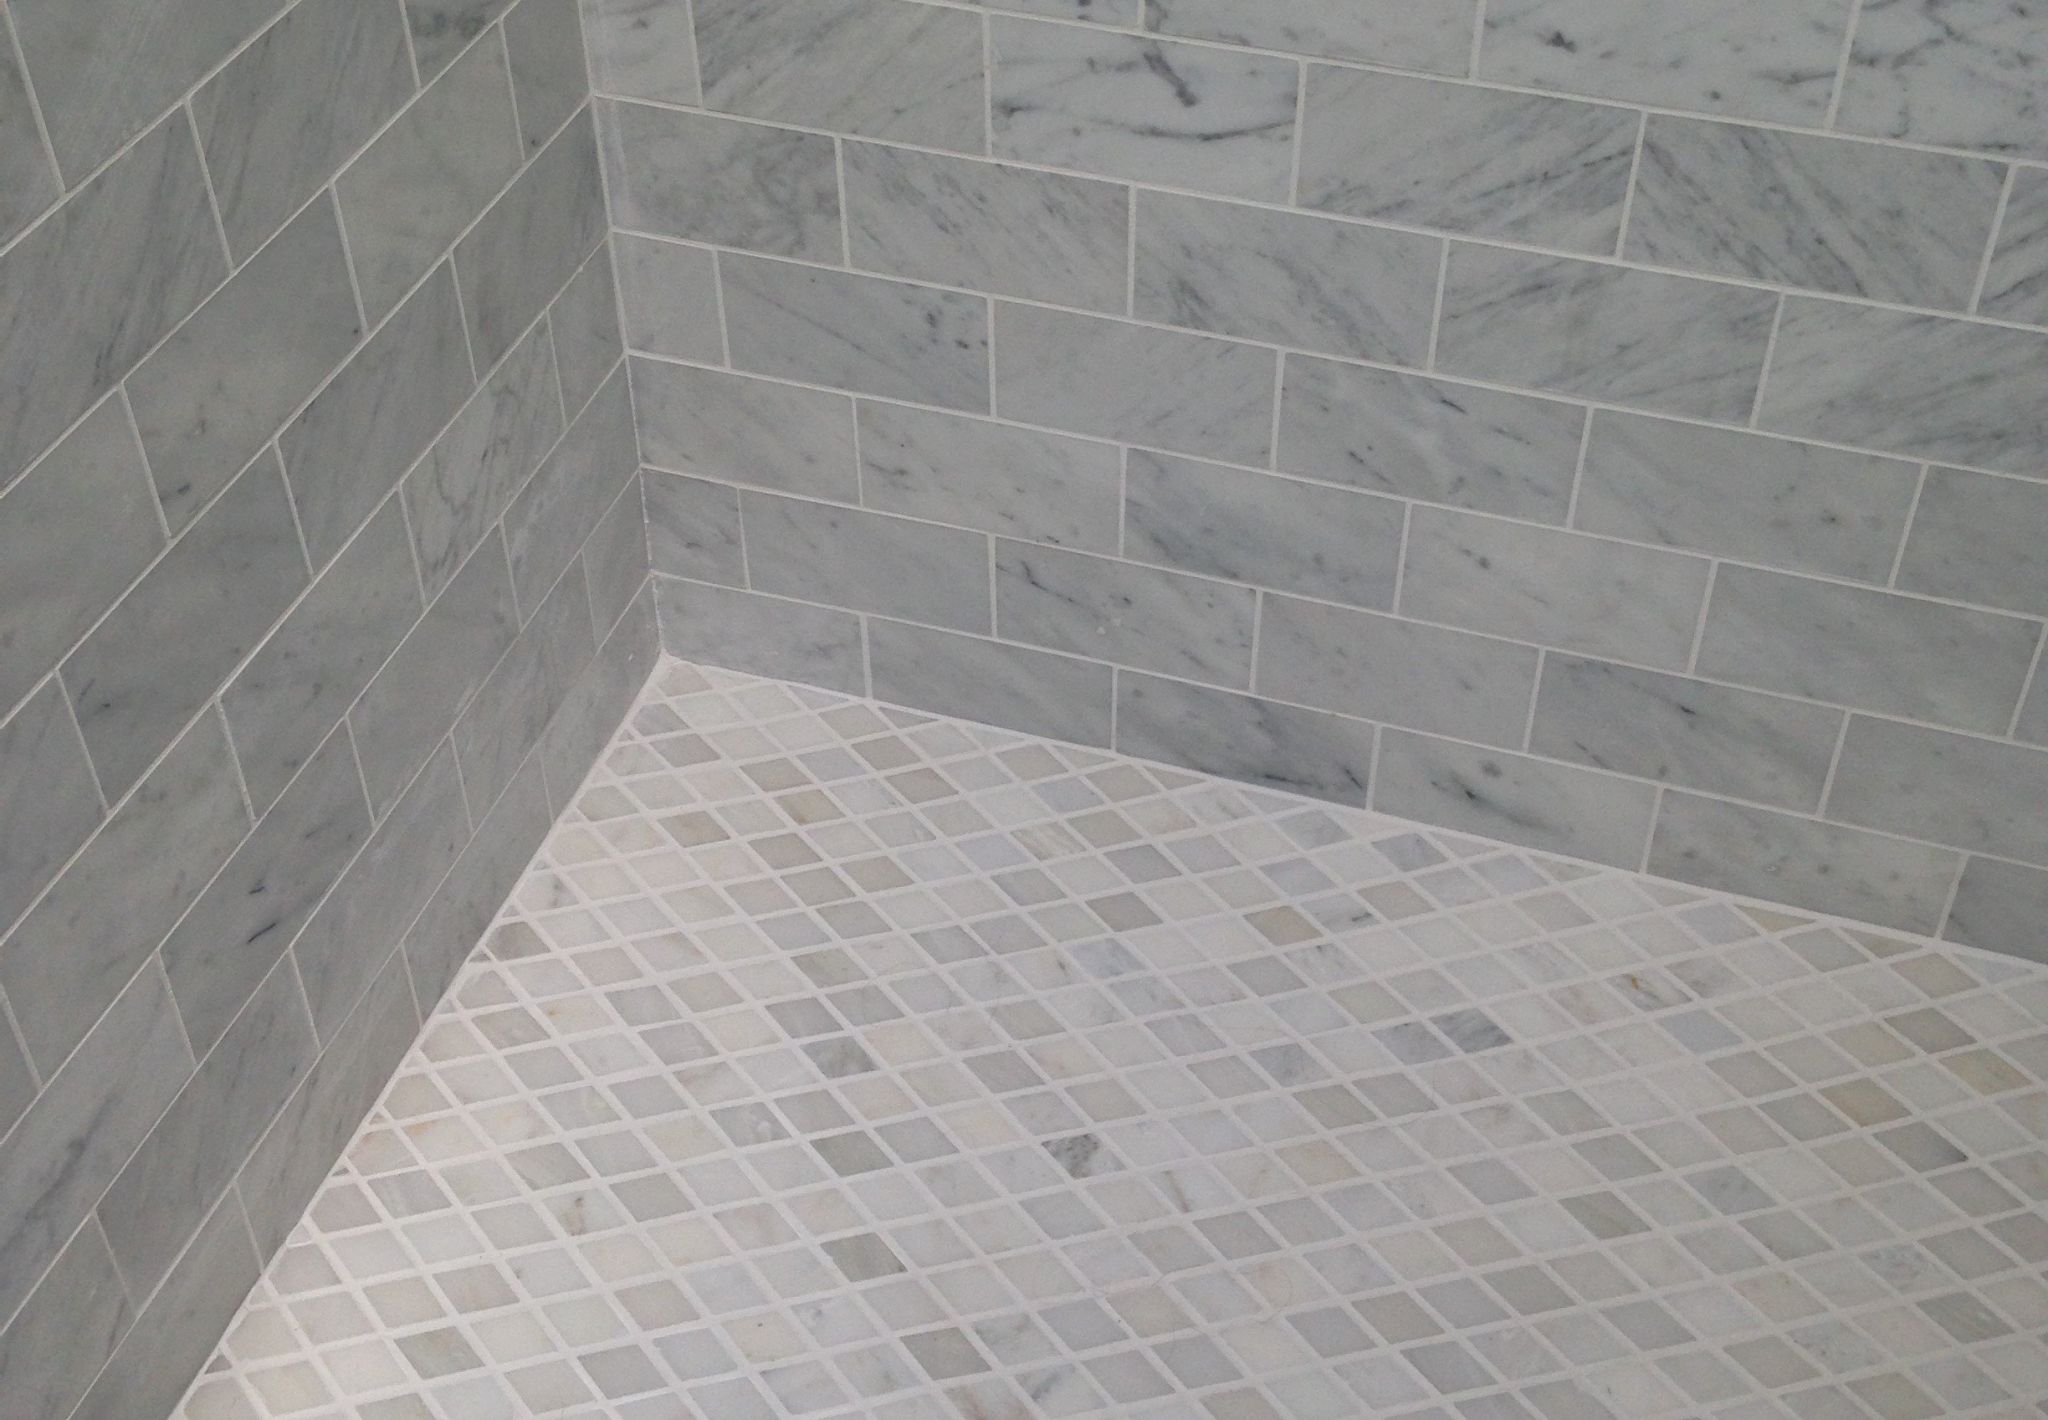 Best Grout for Glass Tile: How to Pick the Right Grout